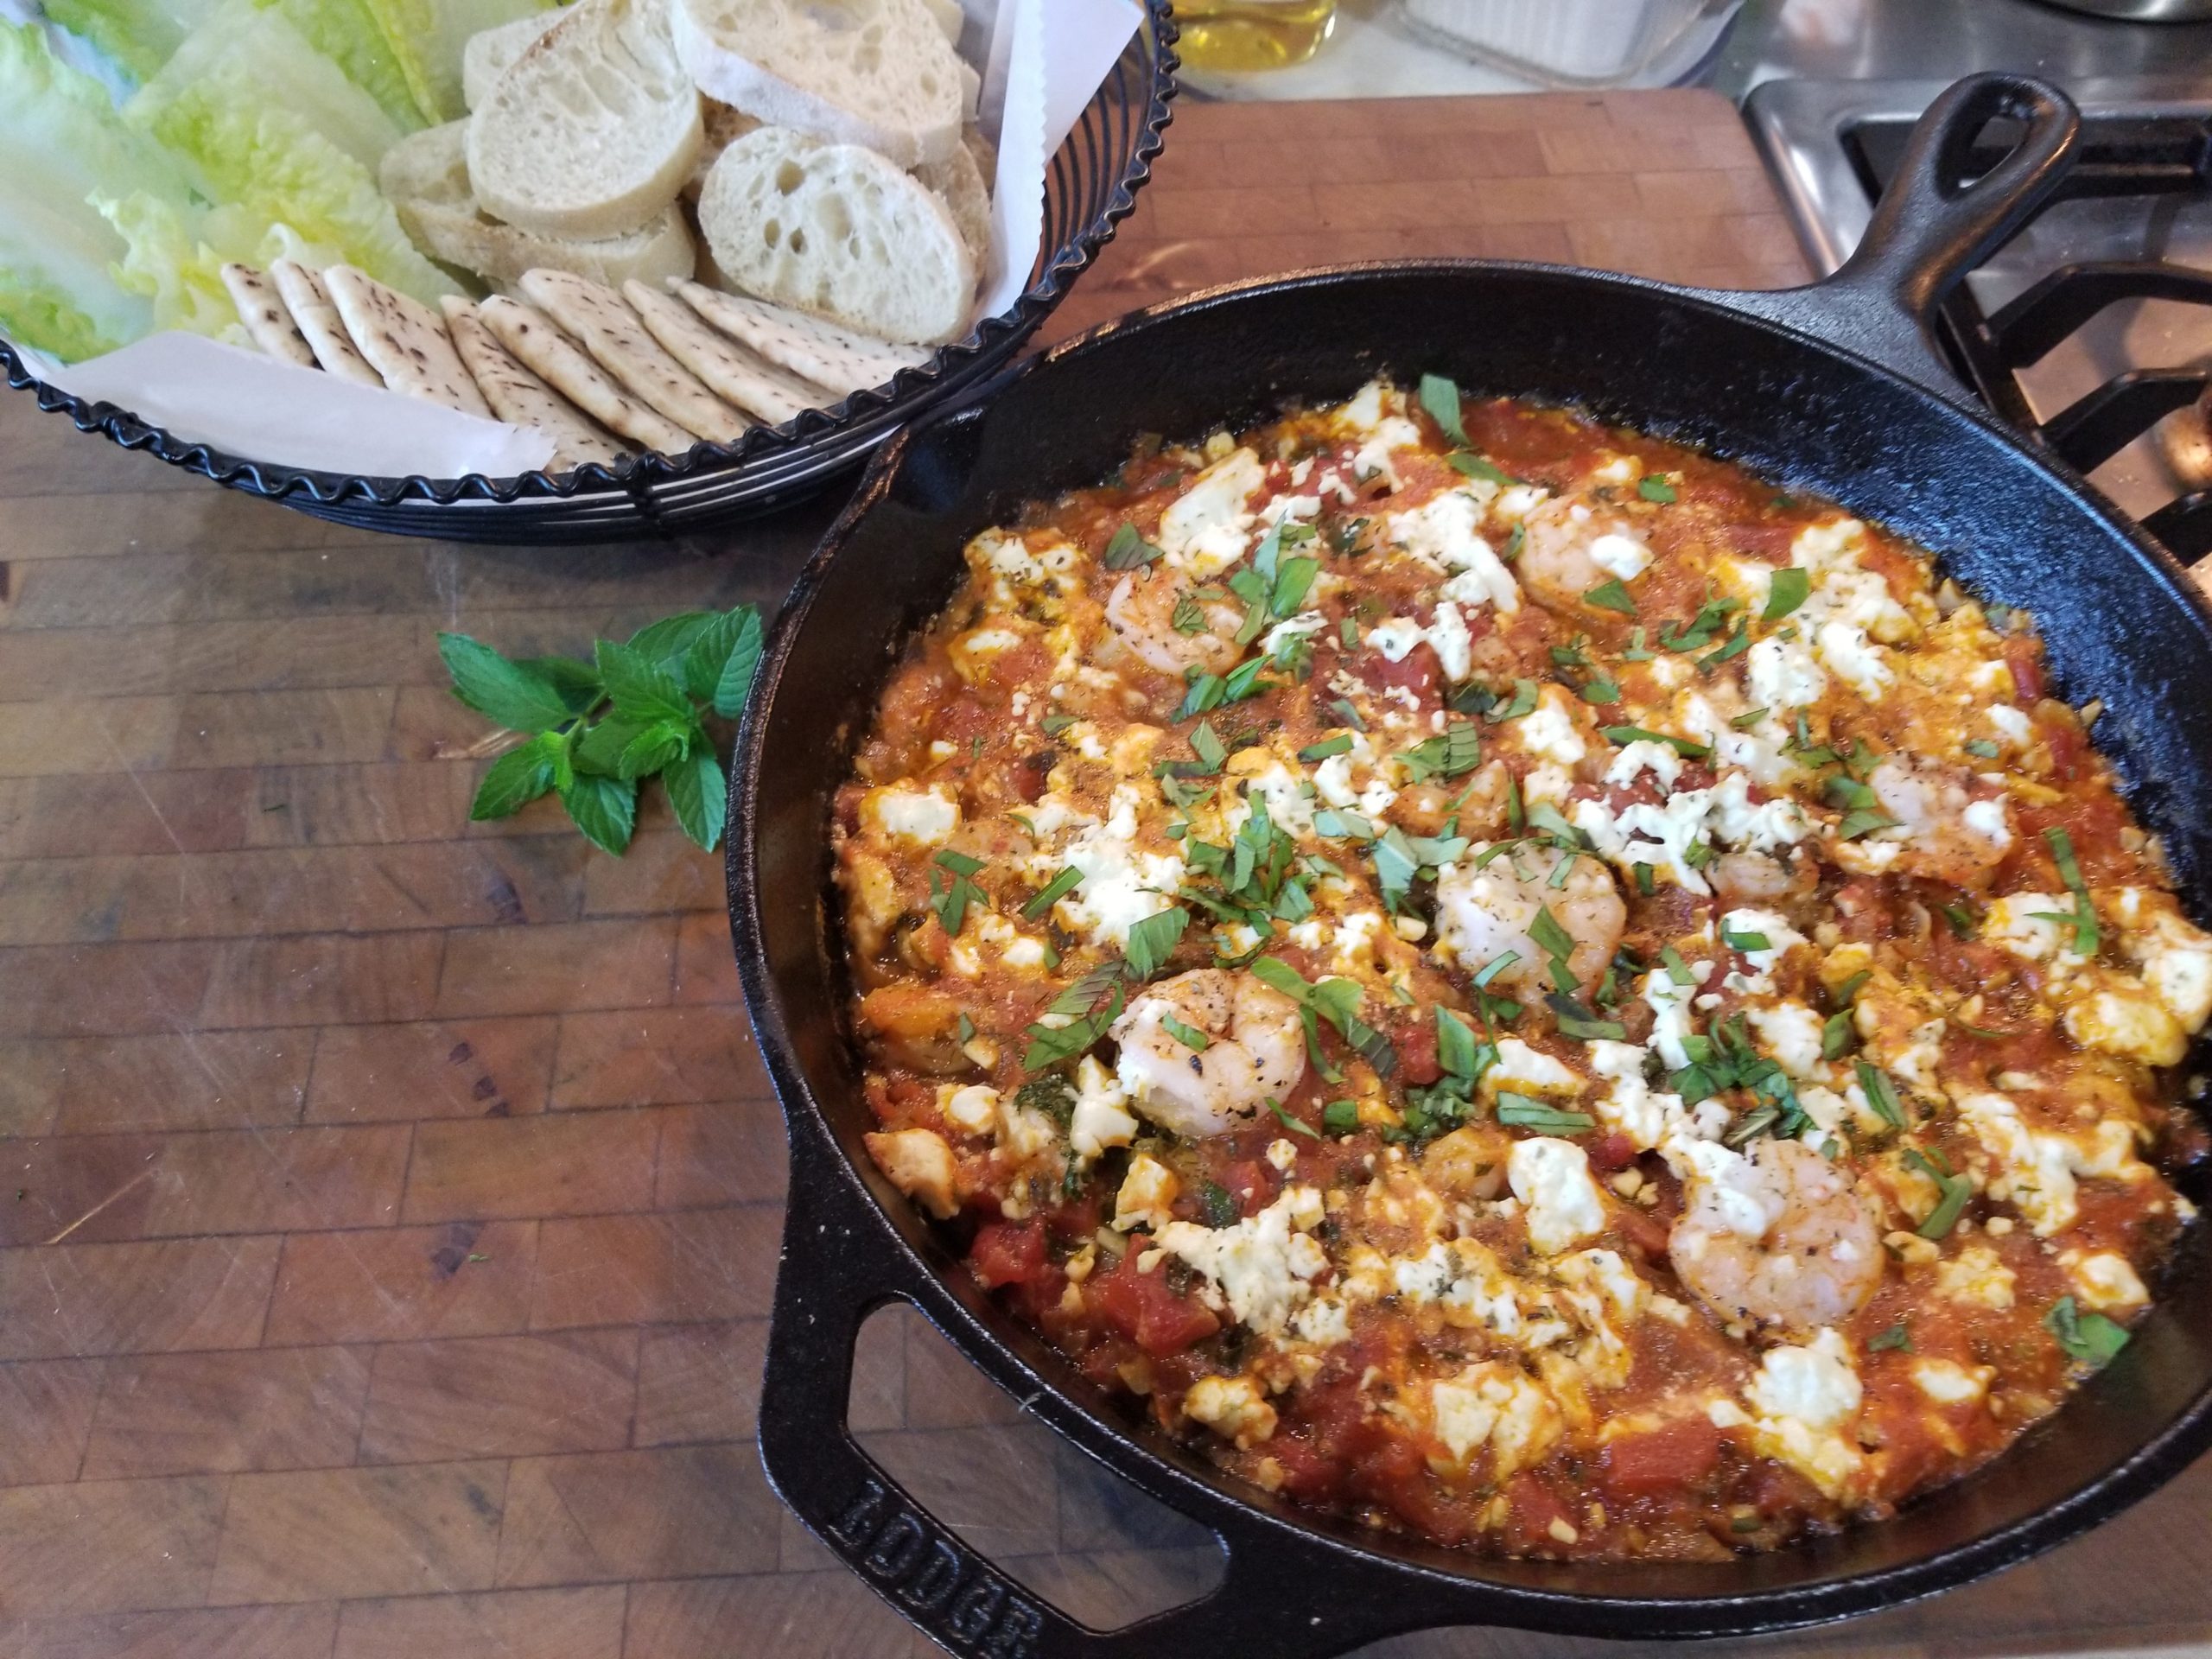 Baked Shrimp with Tomatoes and Feta